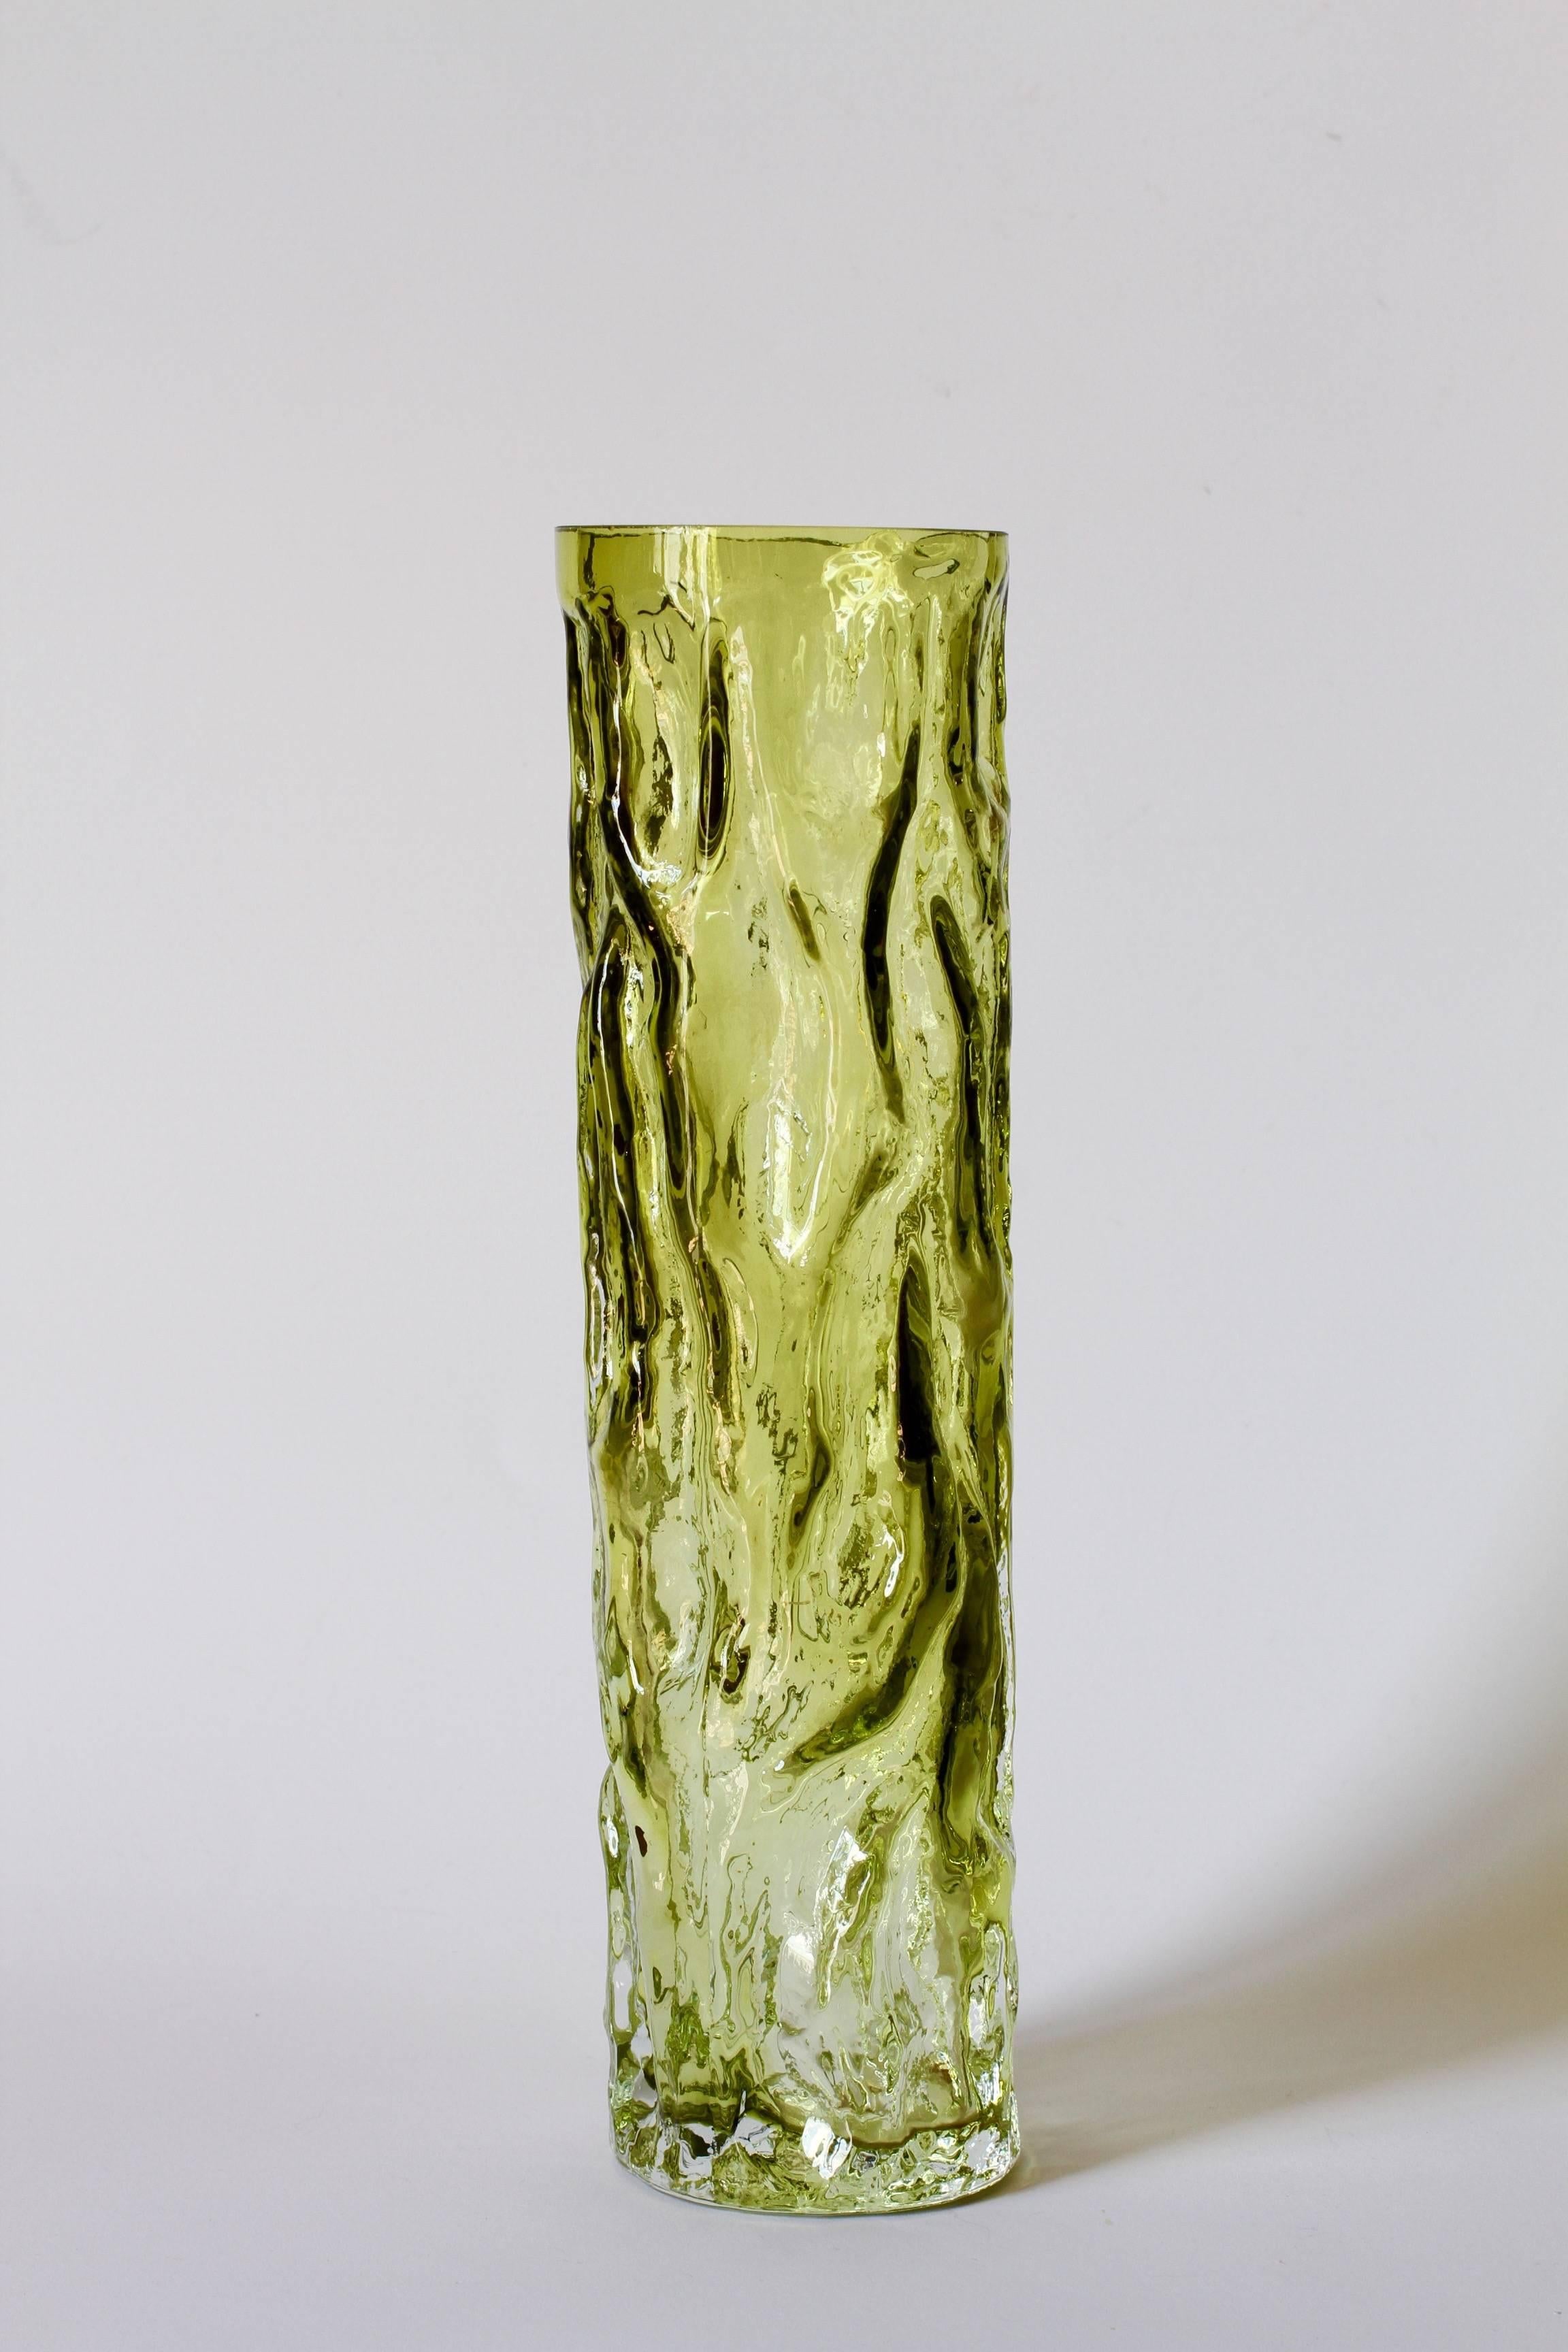 Wonderful and tall Mid-Century Modern German vase by Ingrid Glas, circa 1970. This beautiful vase brings a touch of fun and fantasy to any room with it's whimsical 'tree bark' form captured in moss green coloured / colored mouth blown molded